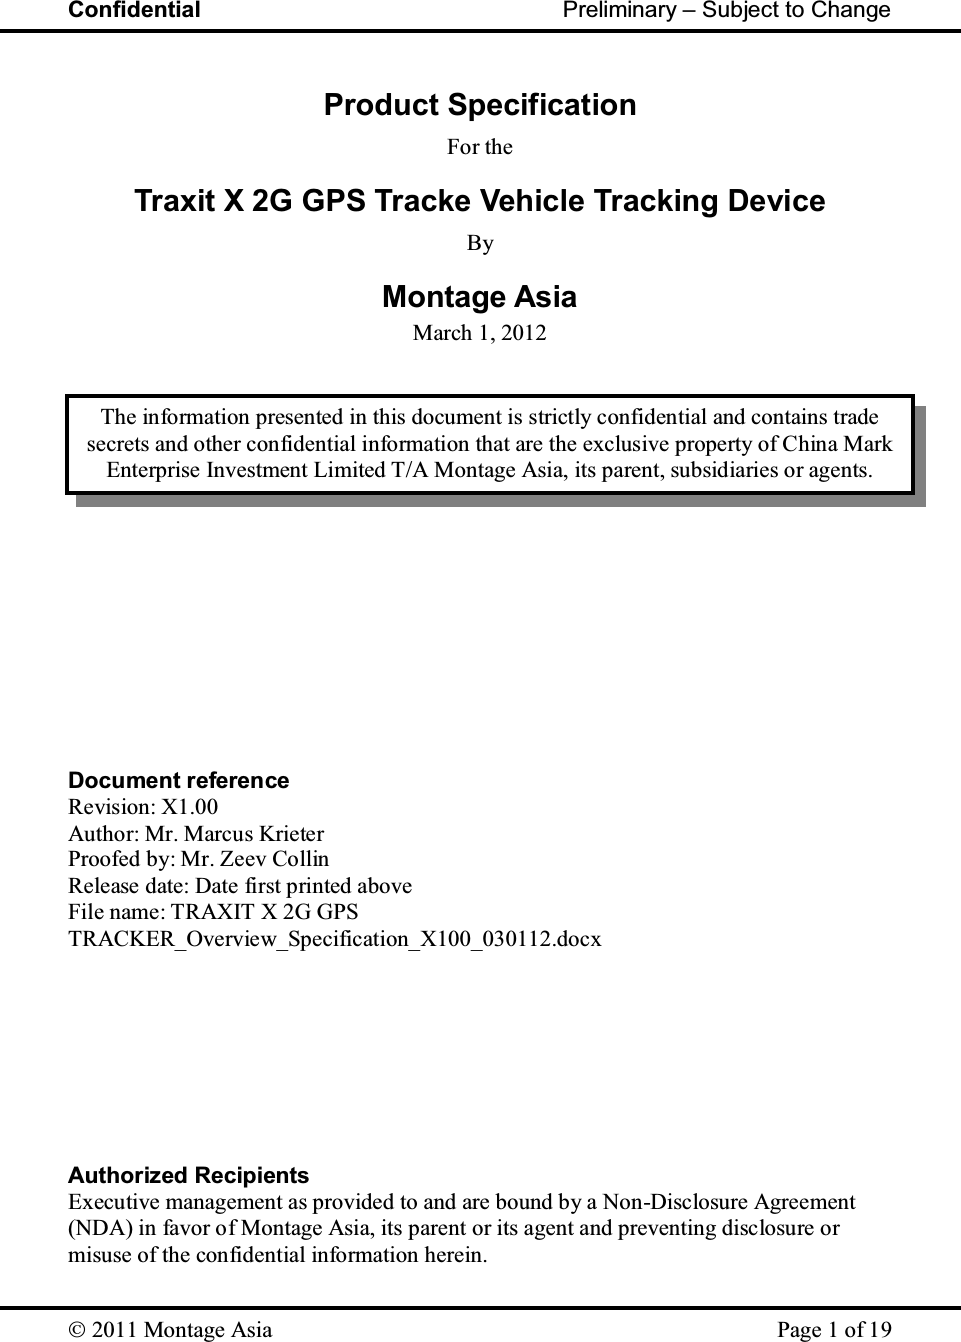 Confidential                                                         Preliminary – Subject to Change   2011 Montage Asia    Page 1 of 19  Product Specification For the Traxit X 2G GPS Tracke Vehicle Tracking Device By Montage Asia March 1, 2012                 Document reference Revision: X1.00 Author: Mr. Marcus Krieter Proofed by: Mr. Zeev Collin Release date: Date first printed above File name: TRAXIT X 2G GPS TRACKER_Overview_Specification_X100_030112.docx         Authorized Recipients Executive management as provided to and are bound by a Non-Disclosure Agreement (NDA) in favor of Montage Asia, its parent or its agent and preventing disclosure or misuse of the confidential information herein. The information presented in this document is strictly confidential and contains trade secrets and other confidential information that are the exclusive property of China Mark Enterprise Investment Limited T/A Montage Asia, its parent, subsidiaries or agents. 